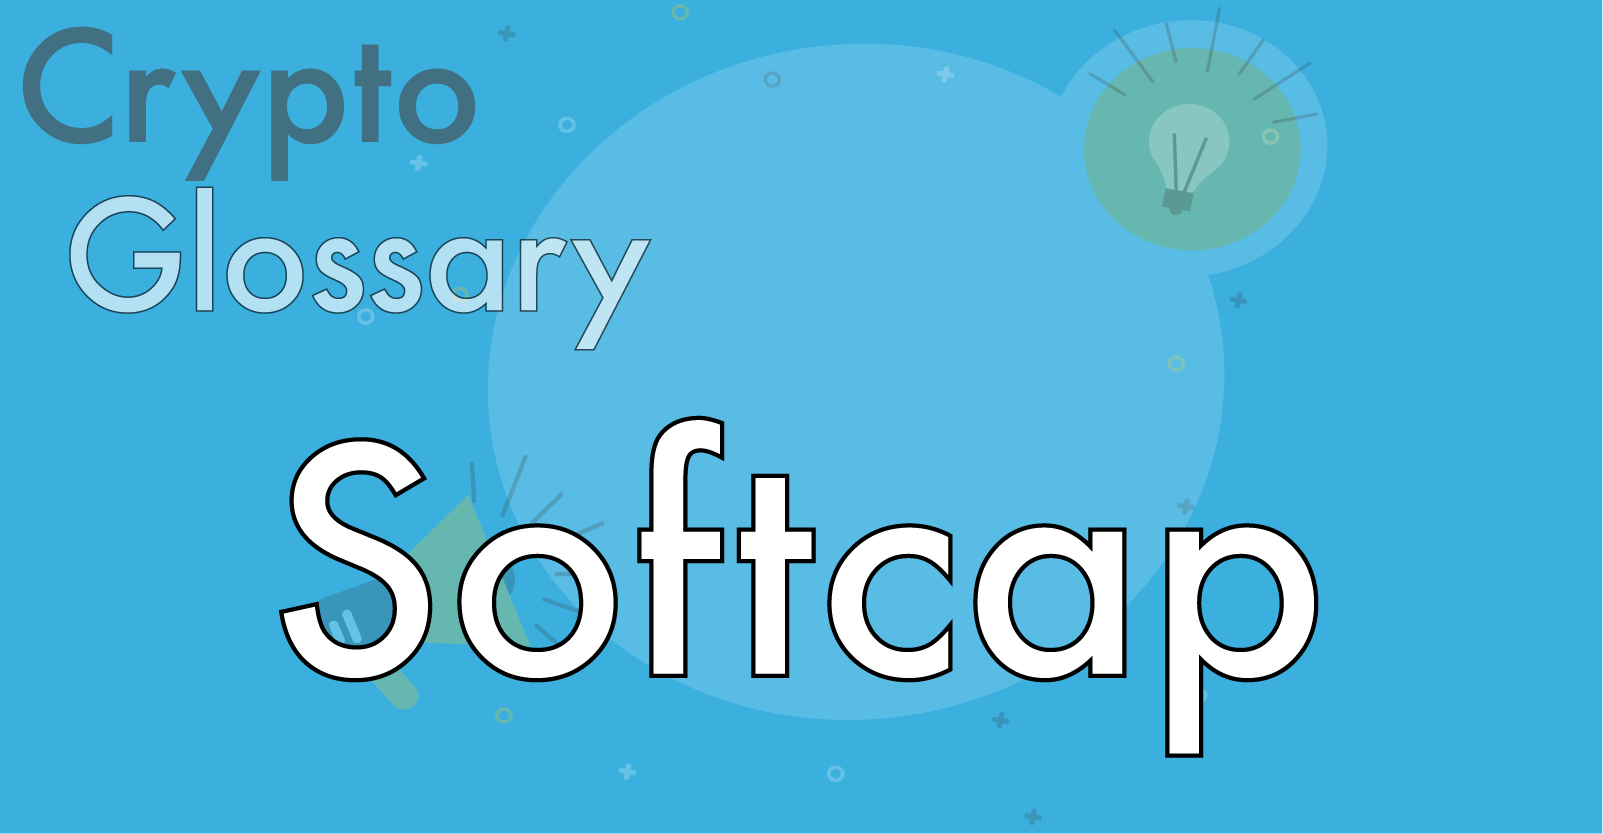 What is a Softcap and what happens if its not reached?